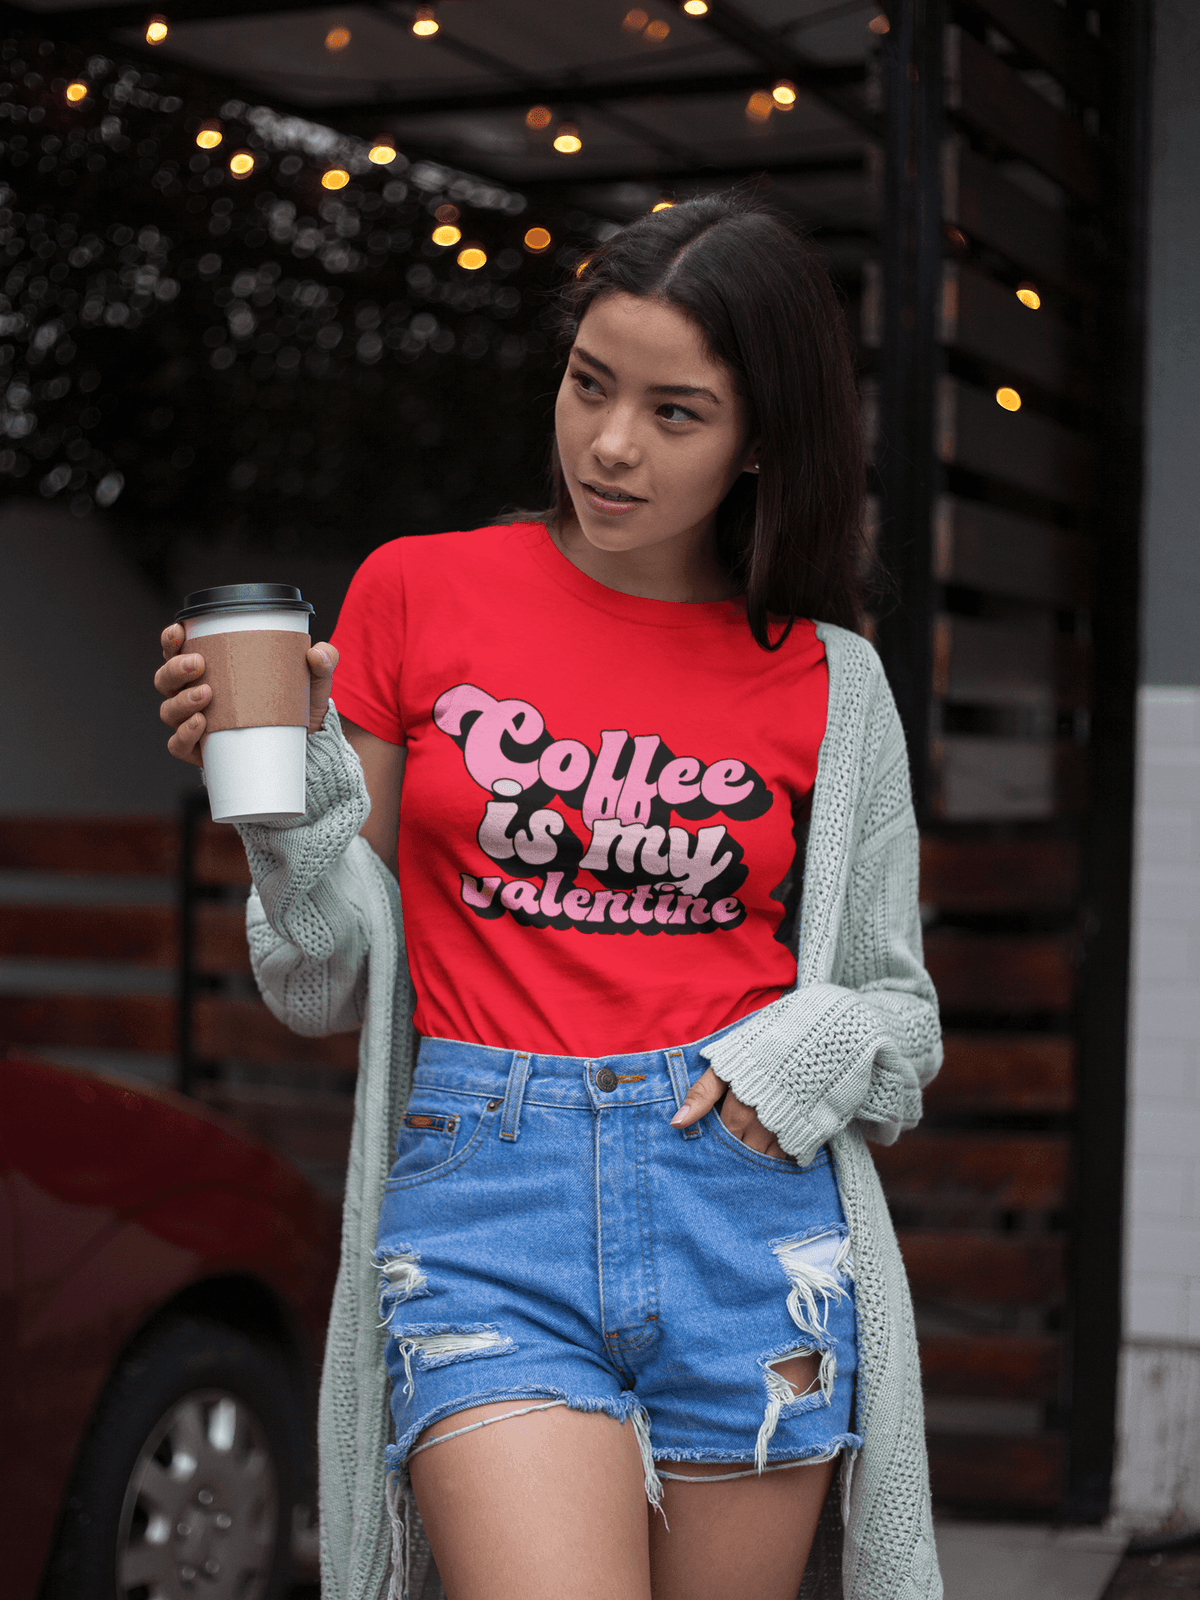 COFFEE IS MY VALENTINE (Text) T-shirt-Regular Fit Tee-StylinArts